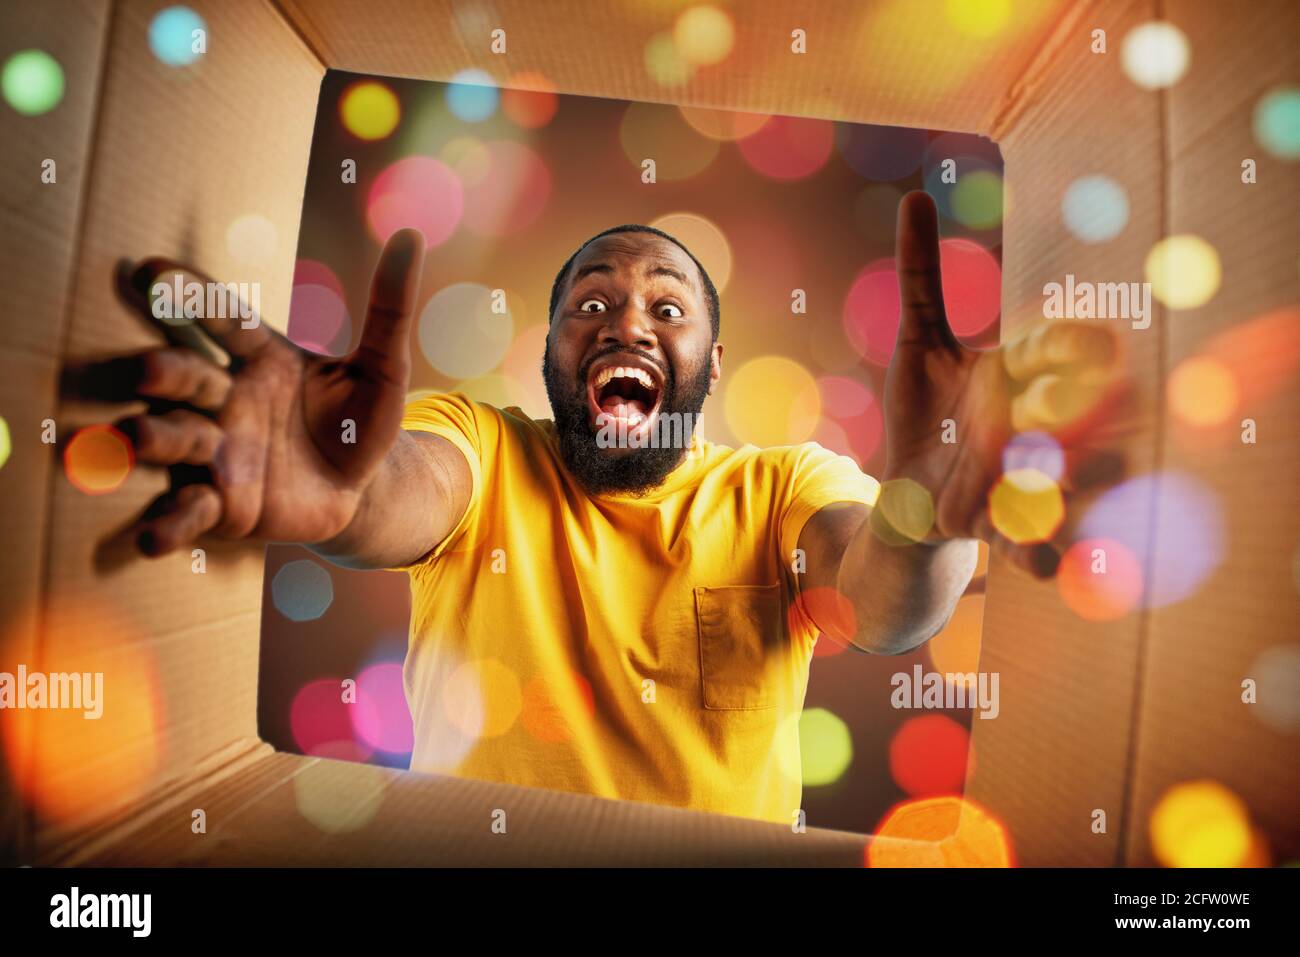 Happy boy receives Christmas gift. happy and surprised expression. Stock Photo